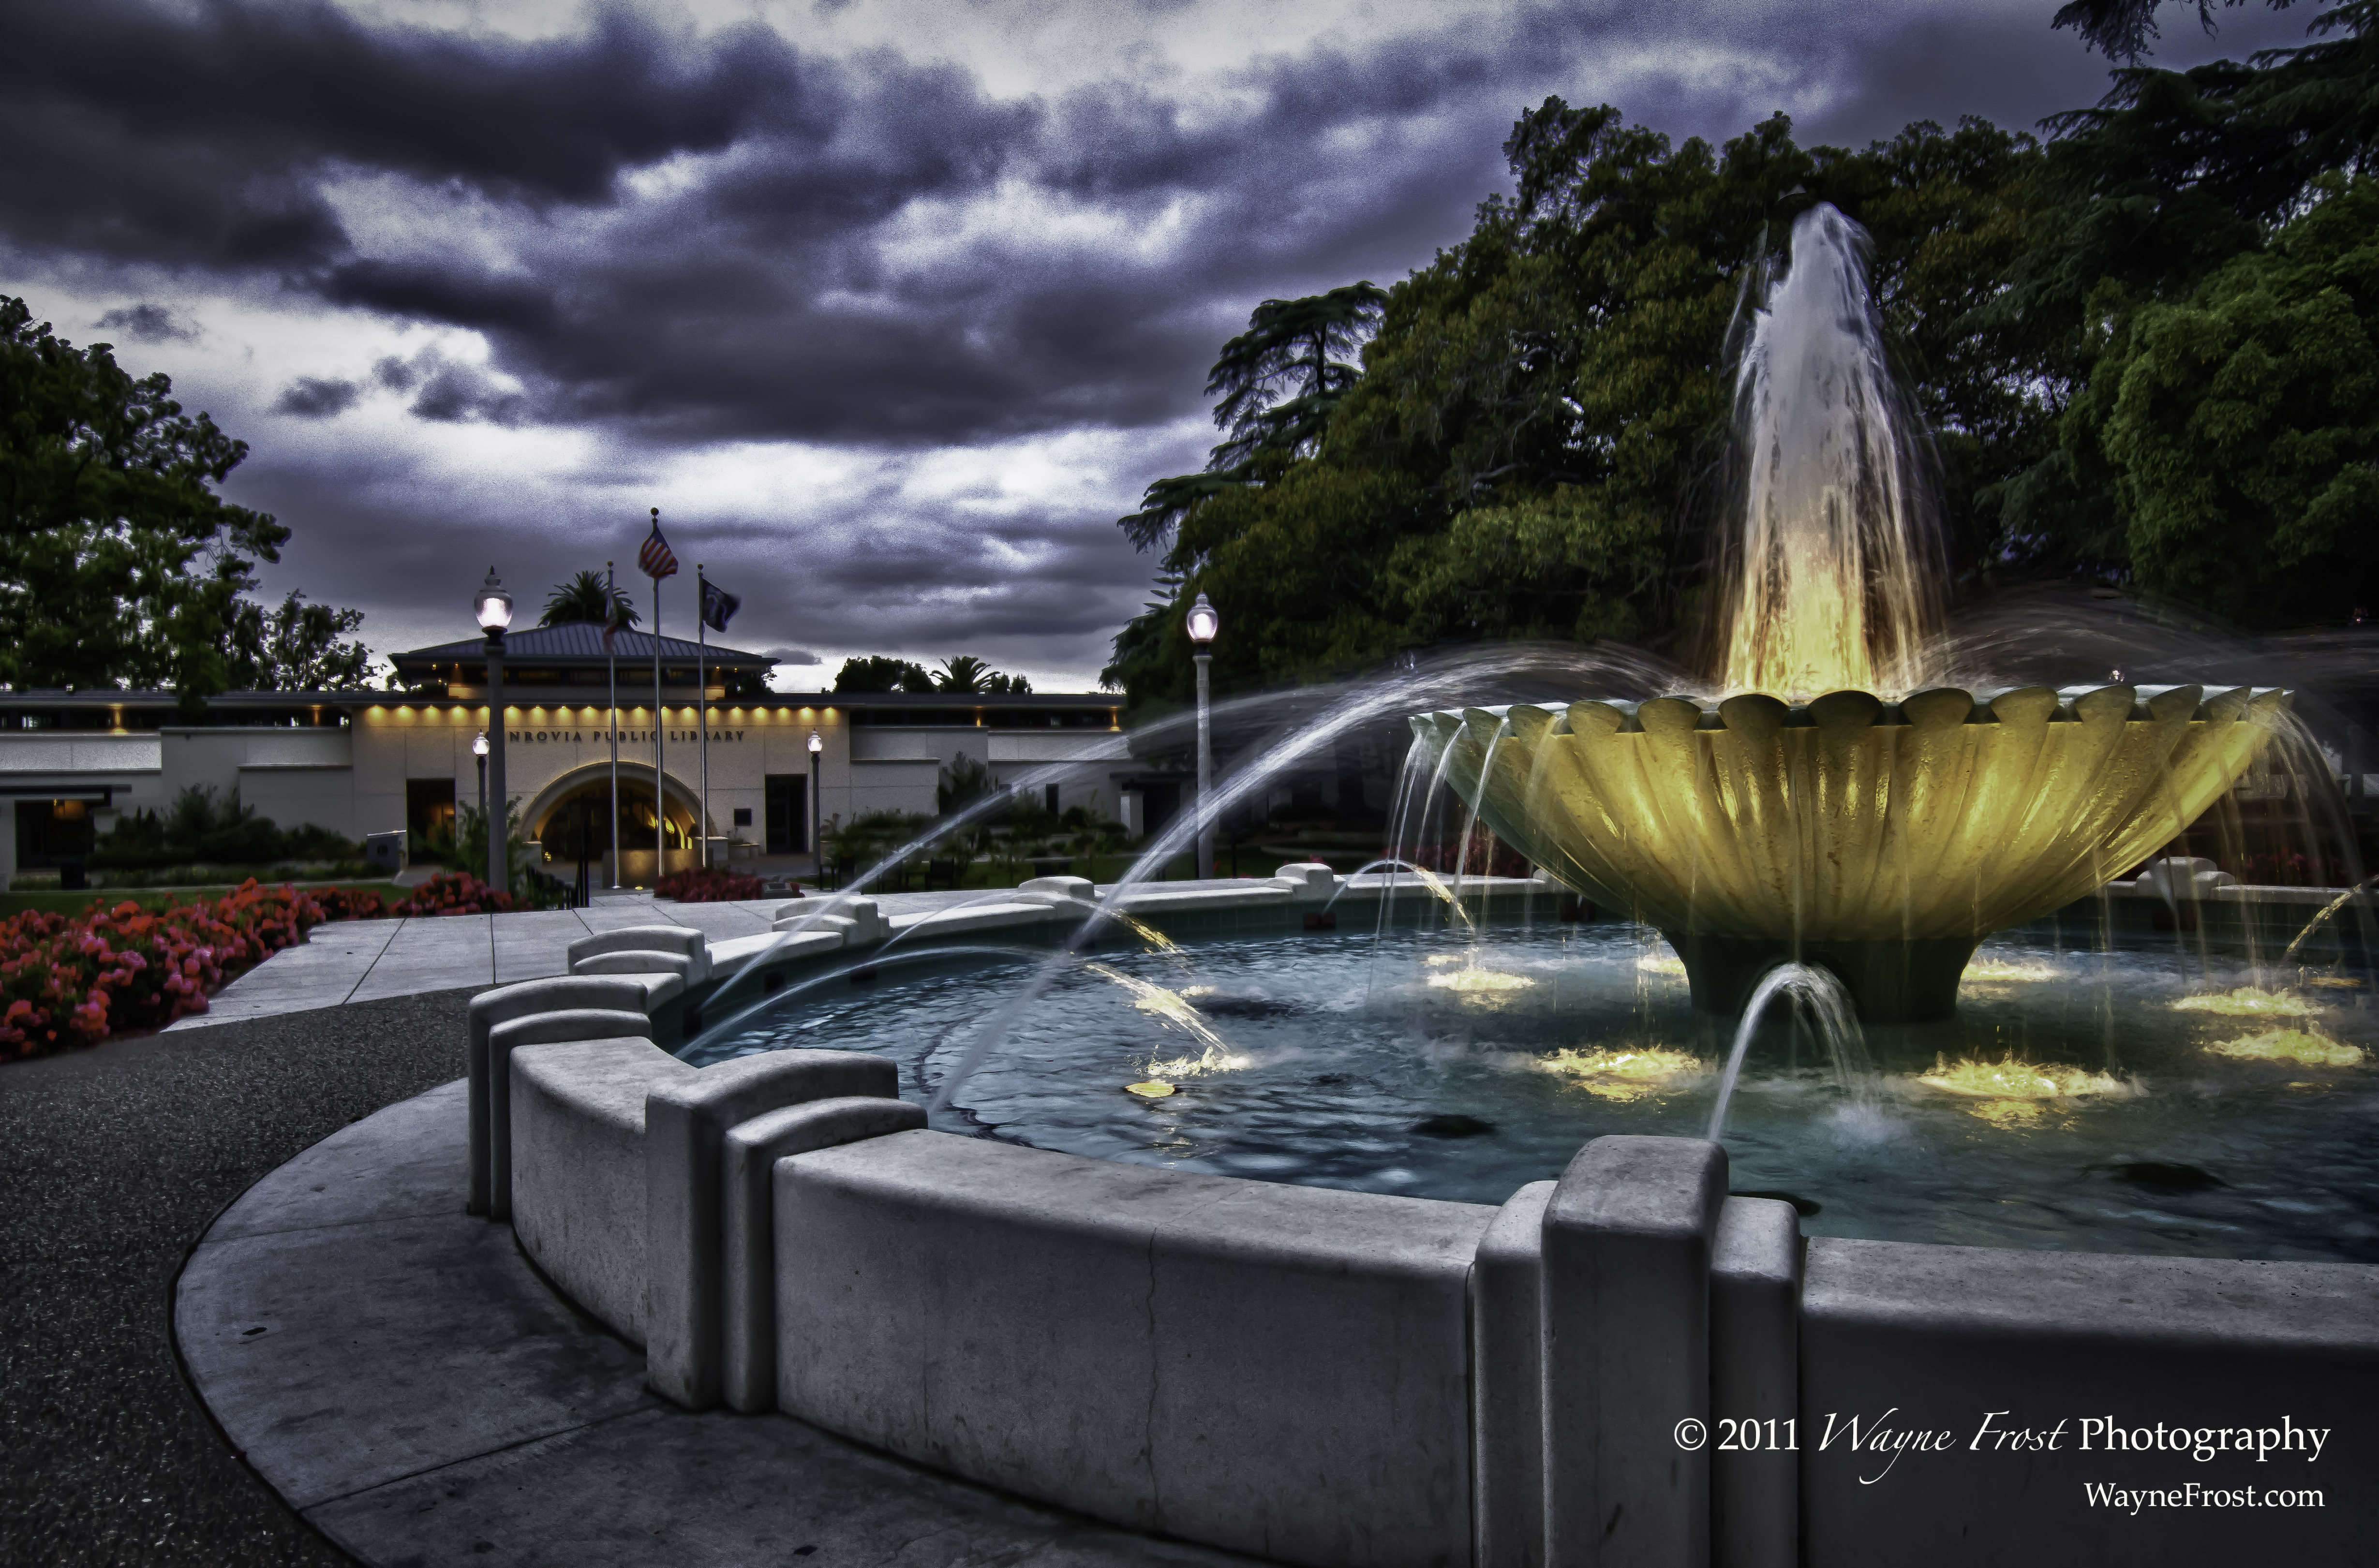 The Fountain At Library Park | Wayne Frost's Photo Blog